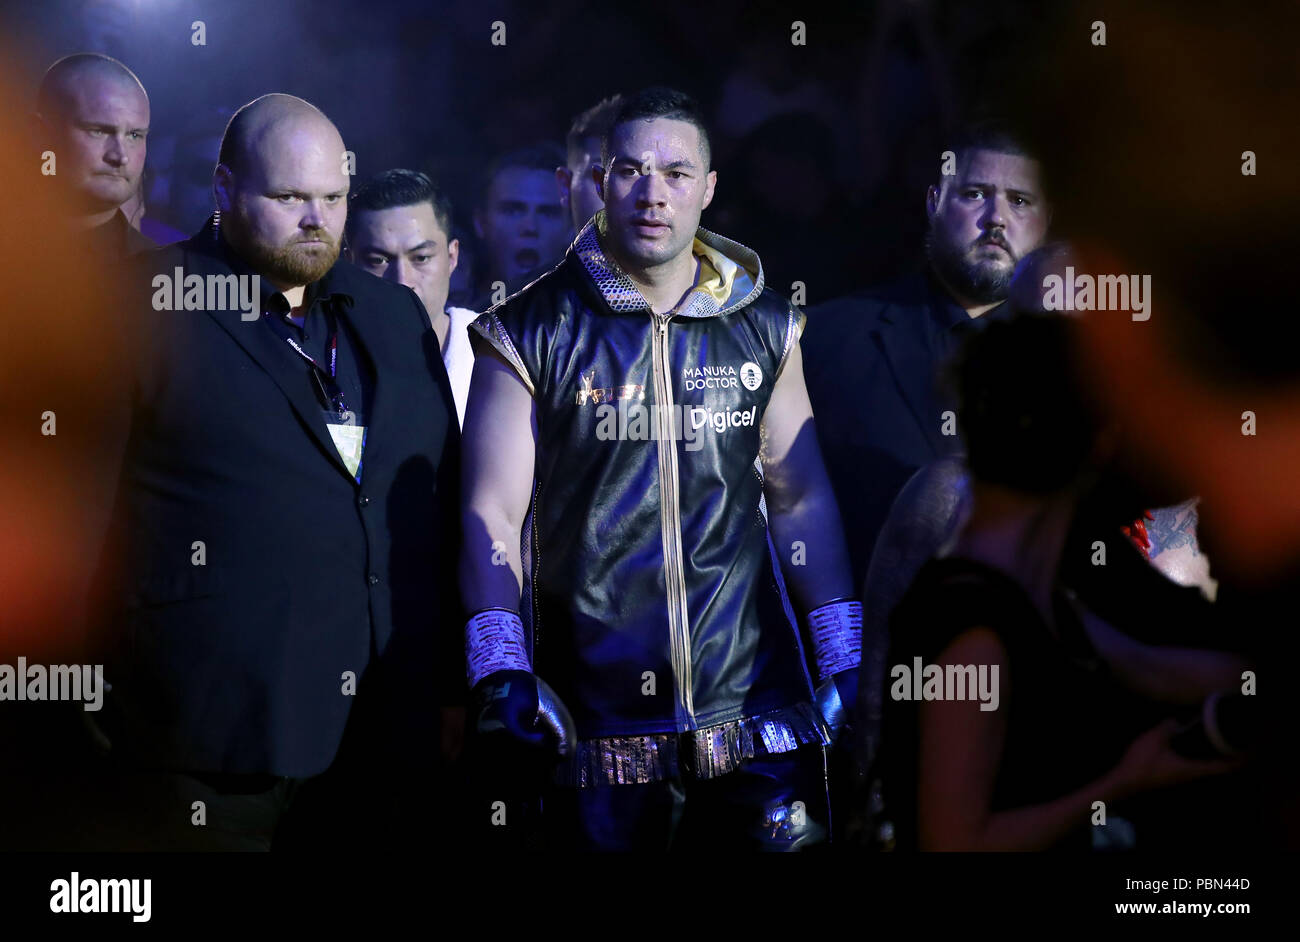 Joseph Parker enters the arena for his WBC Silver Heavyweight title and WBO International Heavyweight title against Dillian Whyte at the O2 Arena, London. Stock Photo